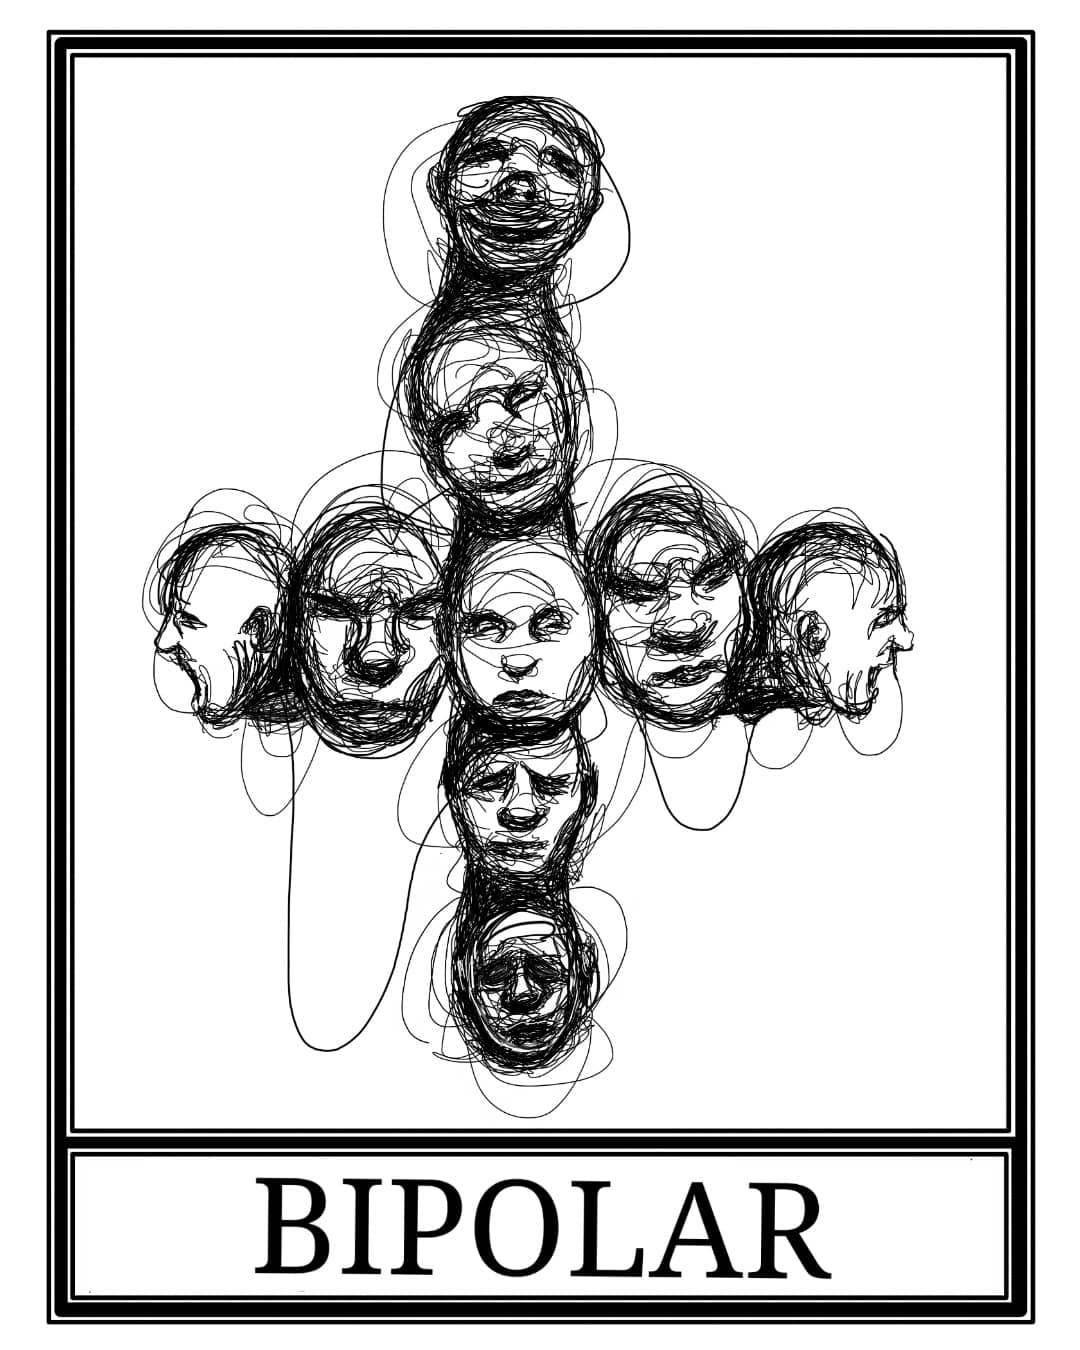 An artistic expression of bipolar disorder. Persons with bipolar disorder may show episodes of drastic mood changes rang